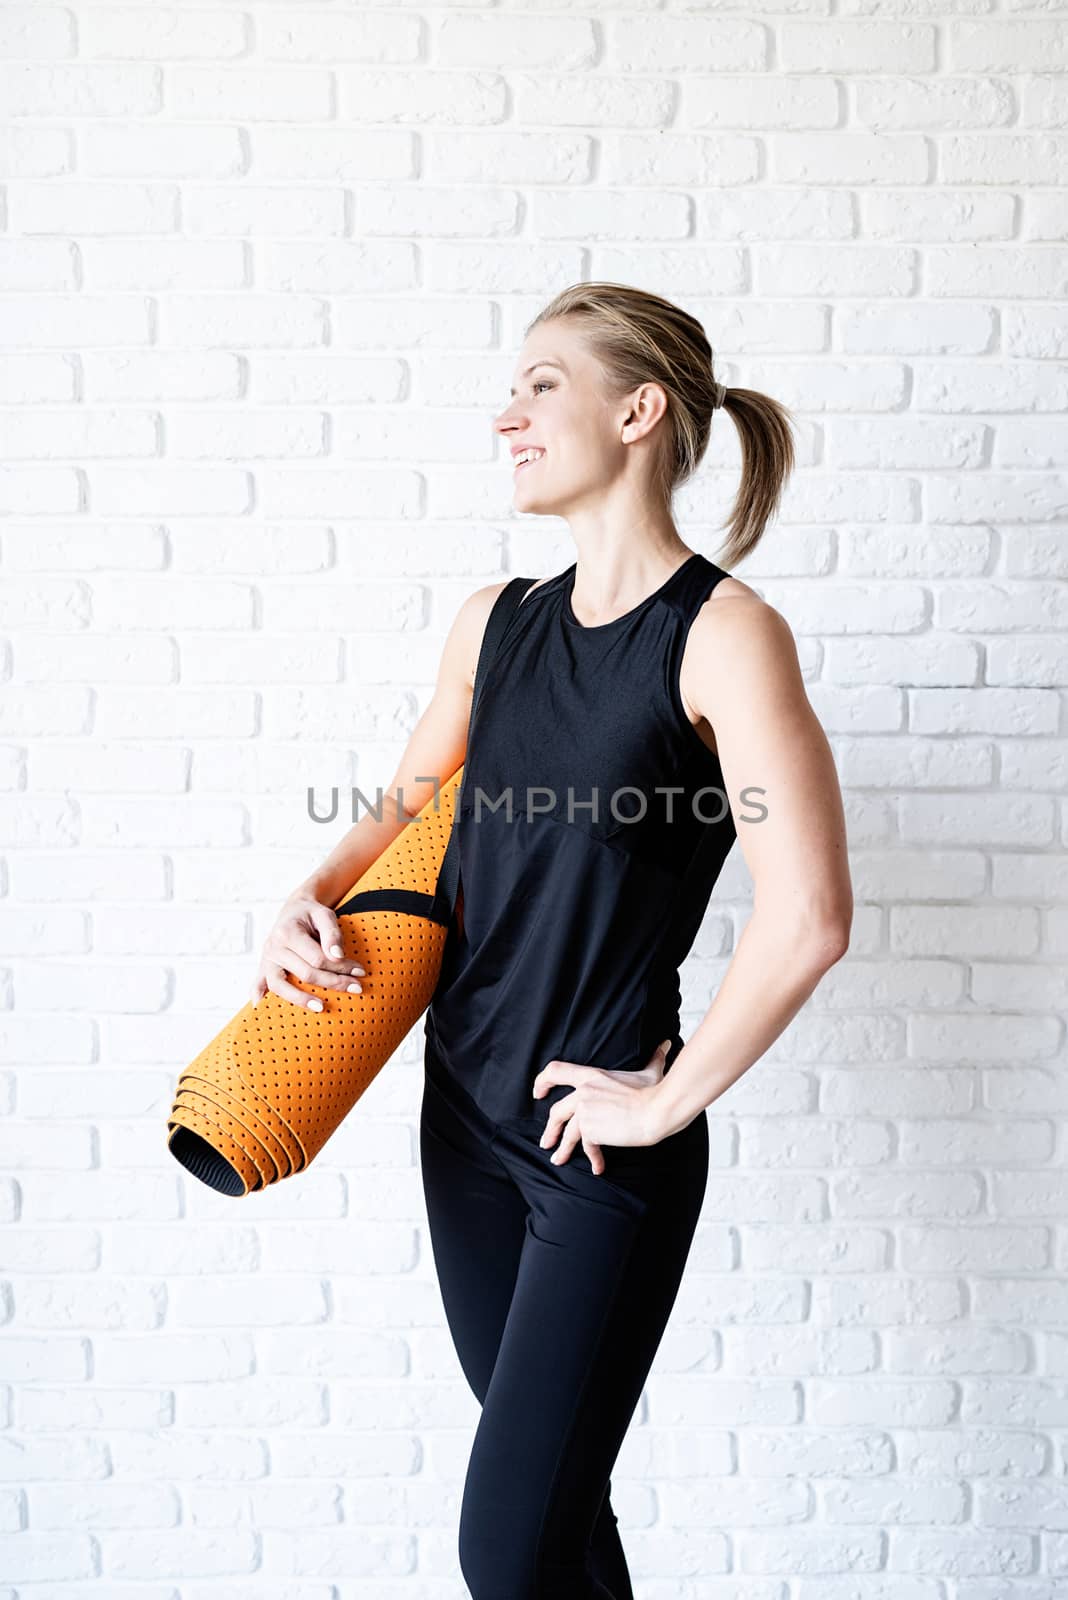 Healthy lifestyle. Sport and fitness. Smiling athletic woman in black sportwear on white brick wall background